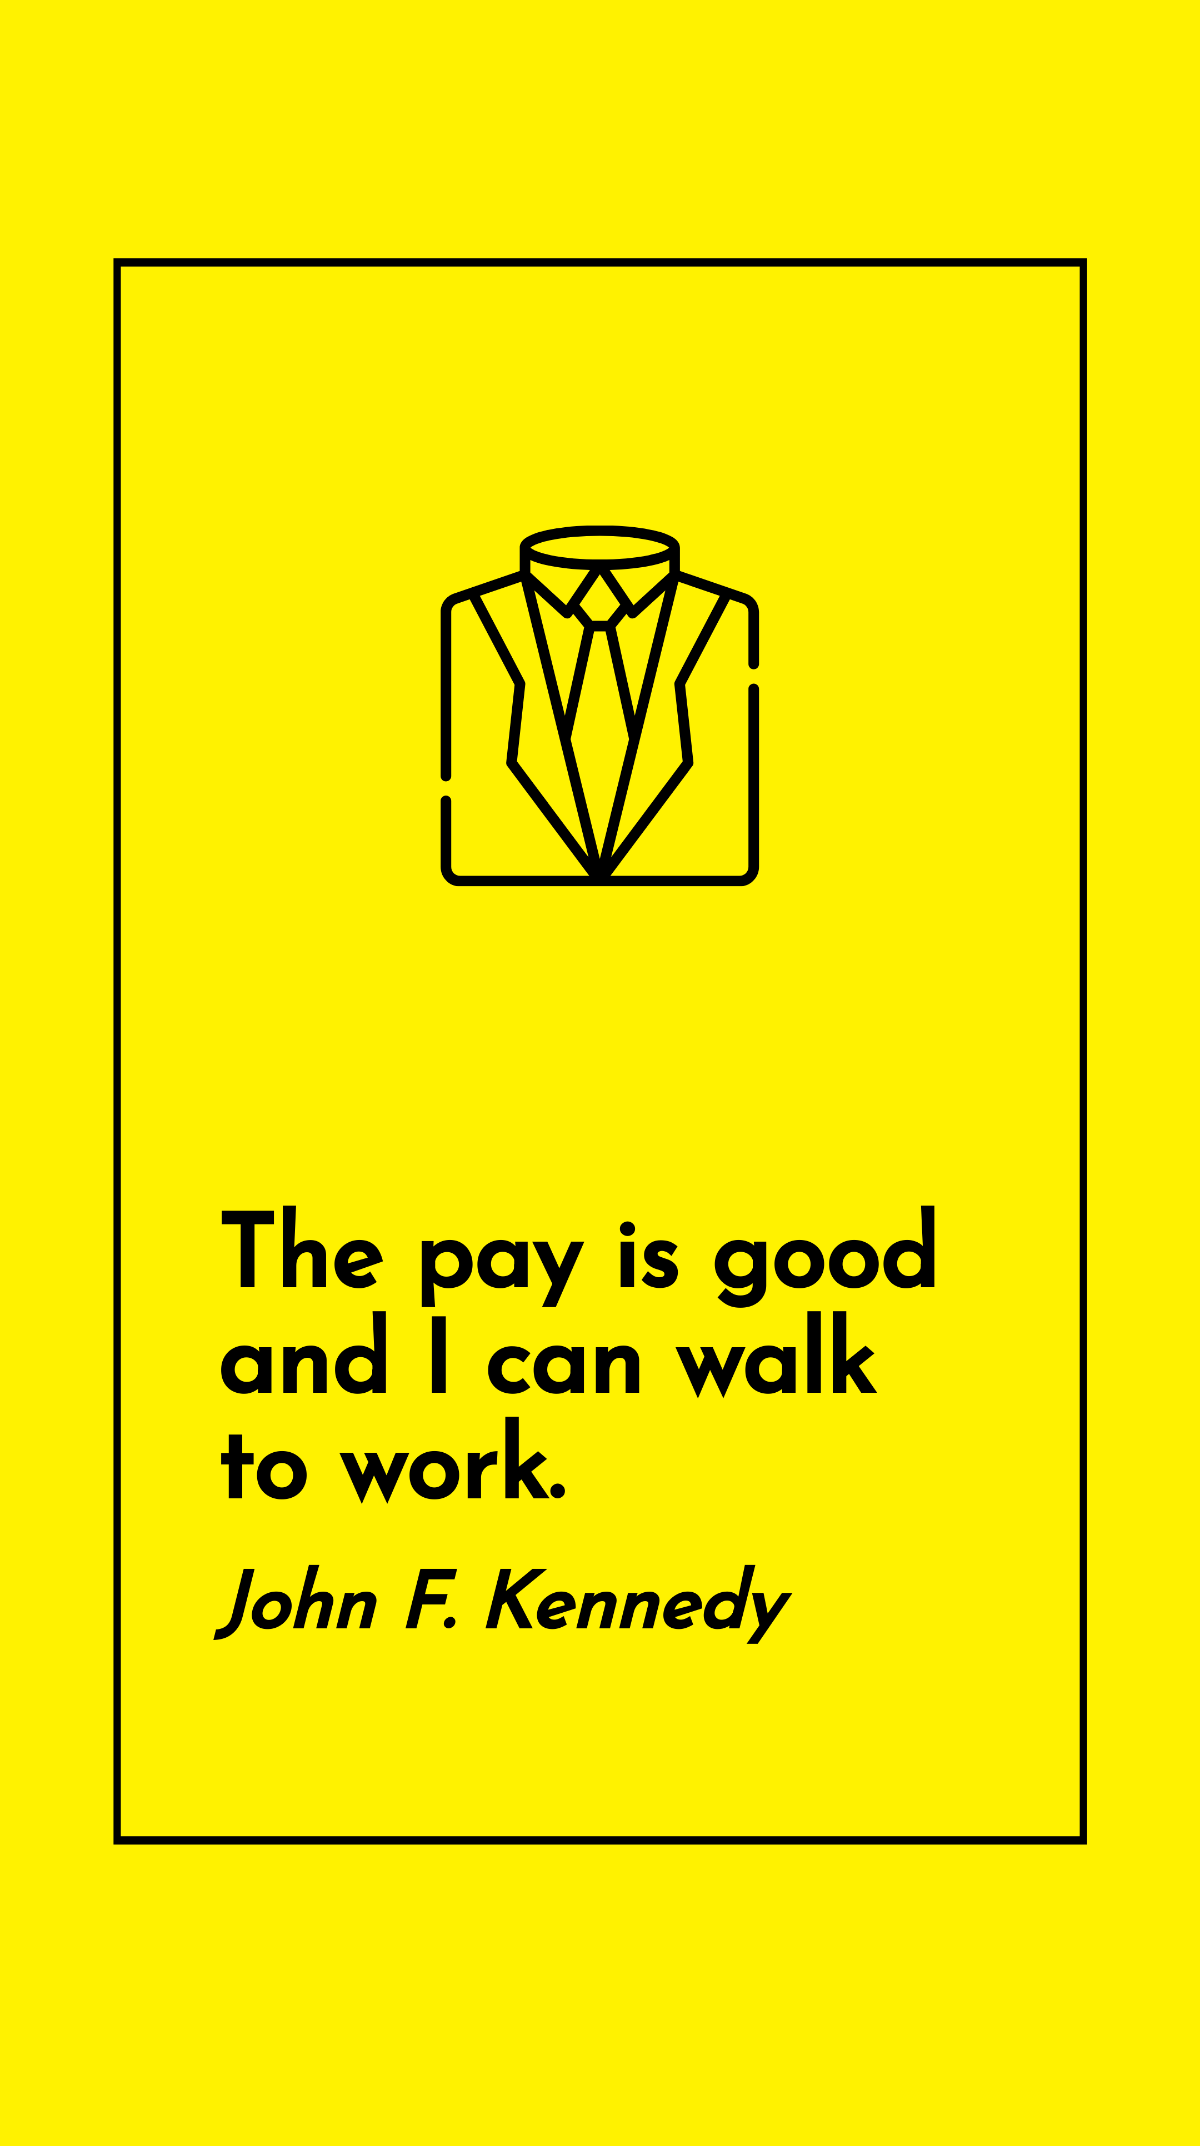 John F. Kennedy - The pay is good and I can walk to work. Template